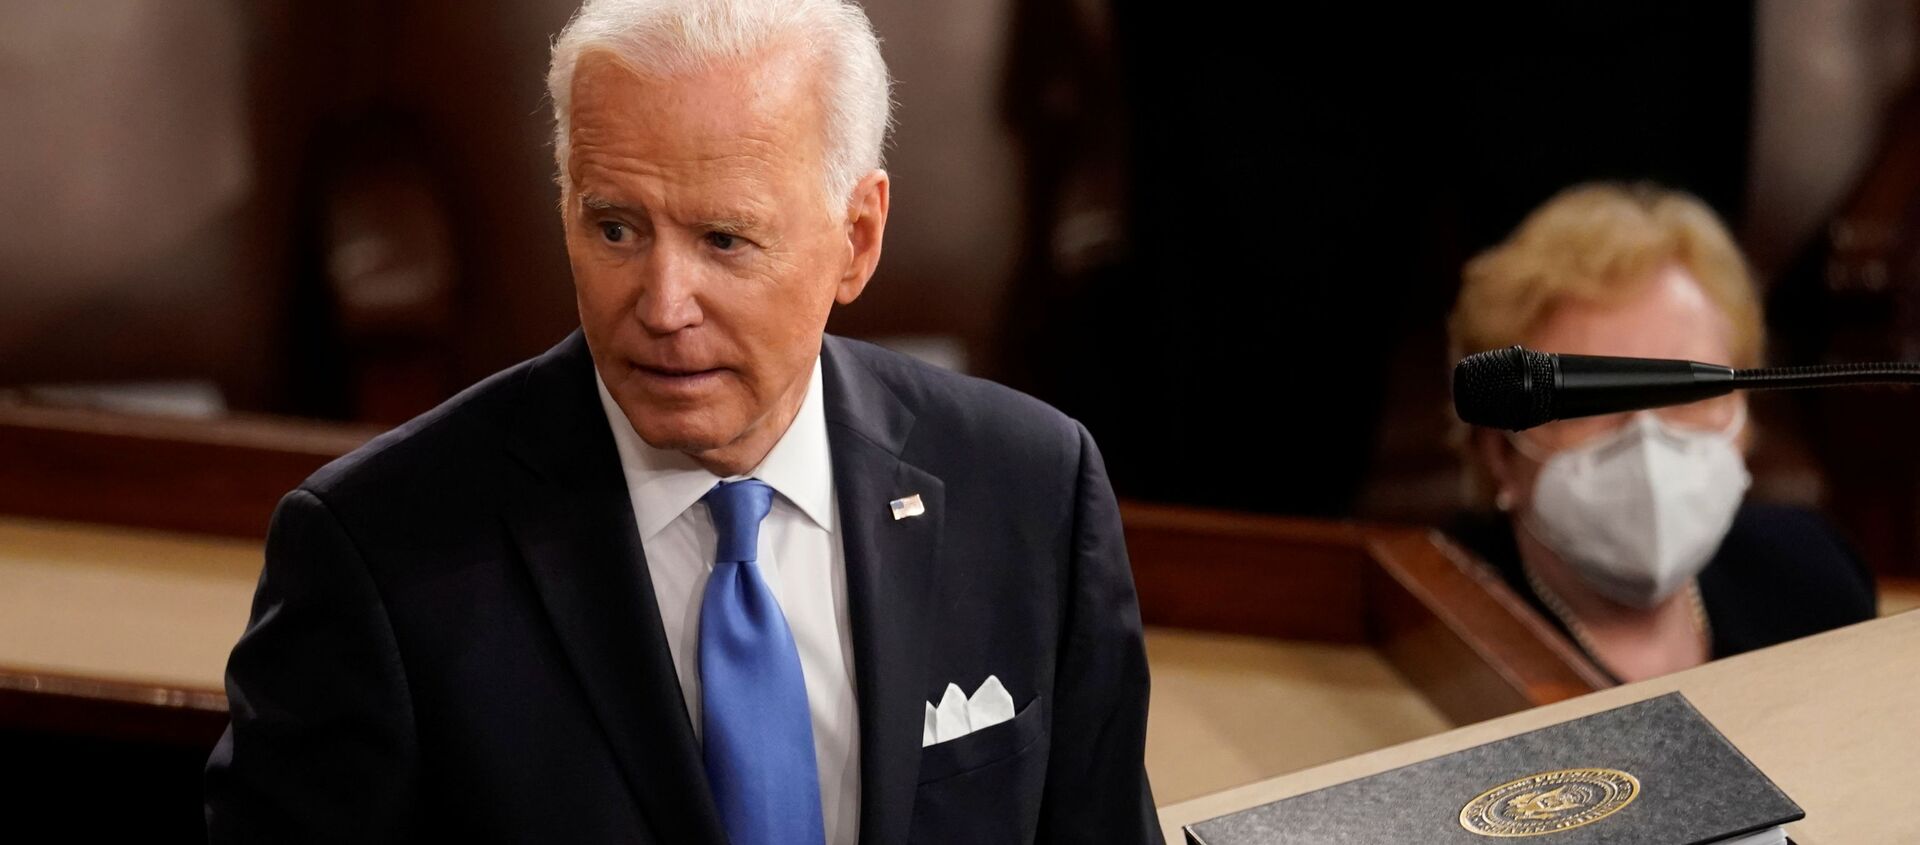 US President Joe Biden turns from the podium after speaking to a joint session of Congress in the House chamber of the US Capitol in Washington, DC, 28 April 2021.  - Sputnik International, 1920, 29.04.2021